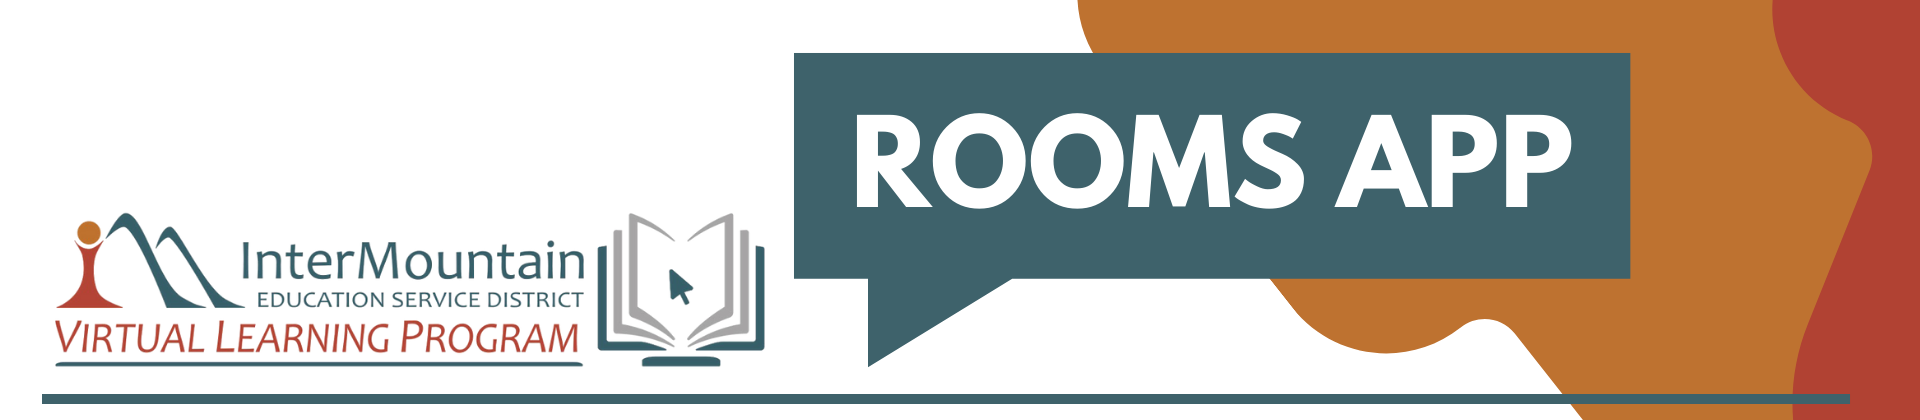 InterMountain ESD VLA logo next to a teal chat bubble with white text "ROOMS APP", with orange and red colorful shapes in the background